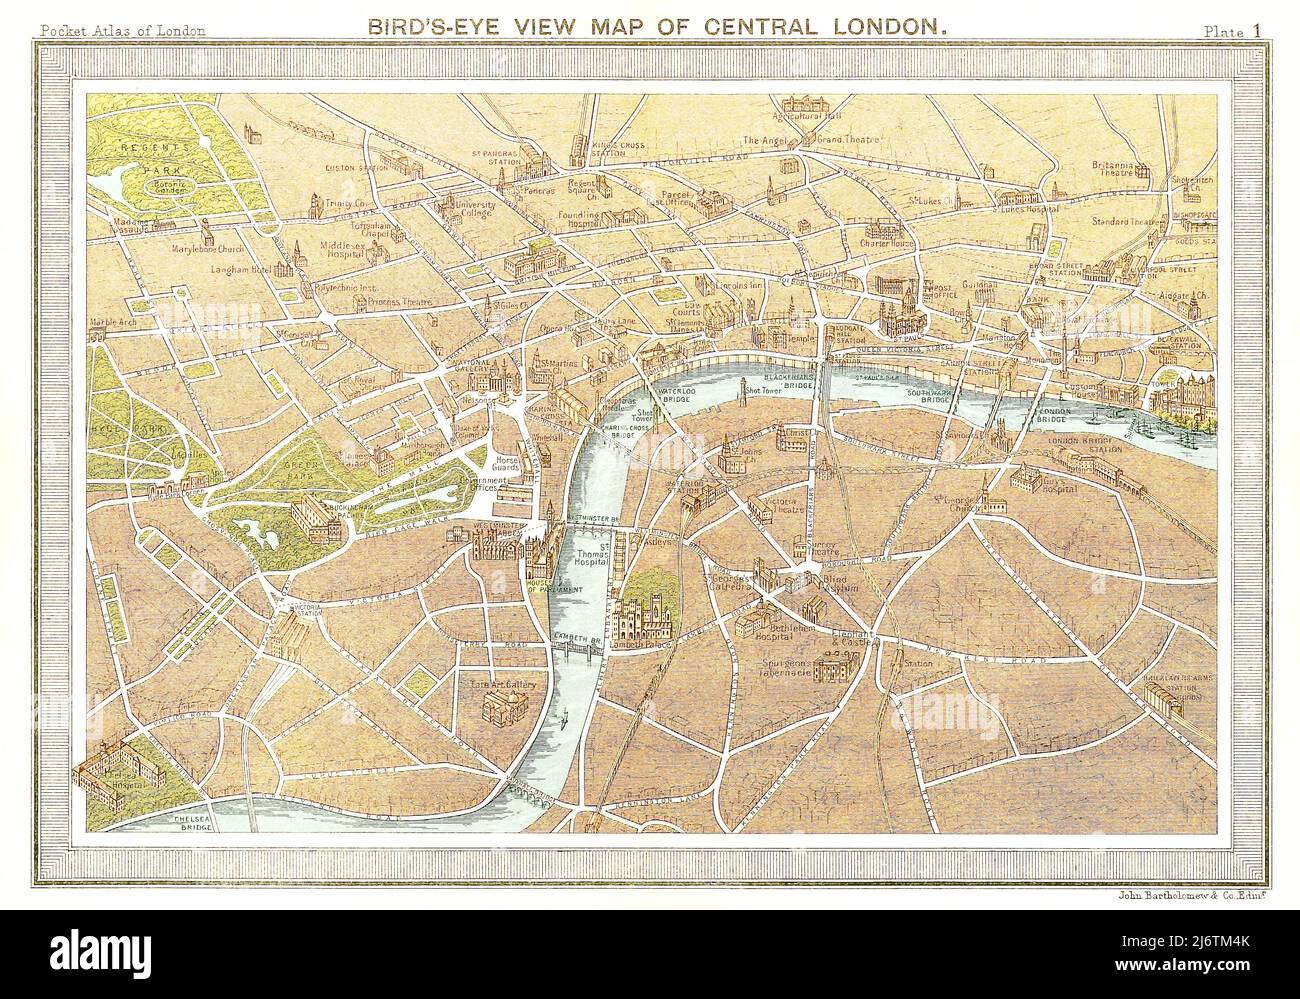 Bird's-Eye View Map of Central London - 1887 Stock Photo